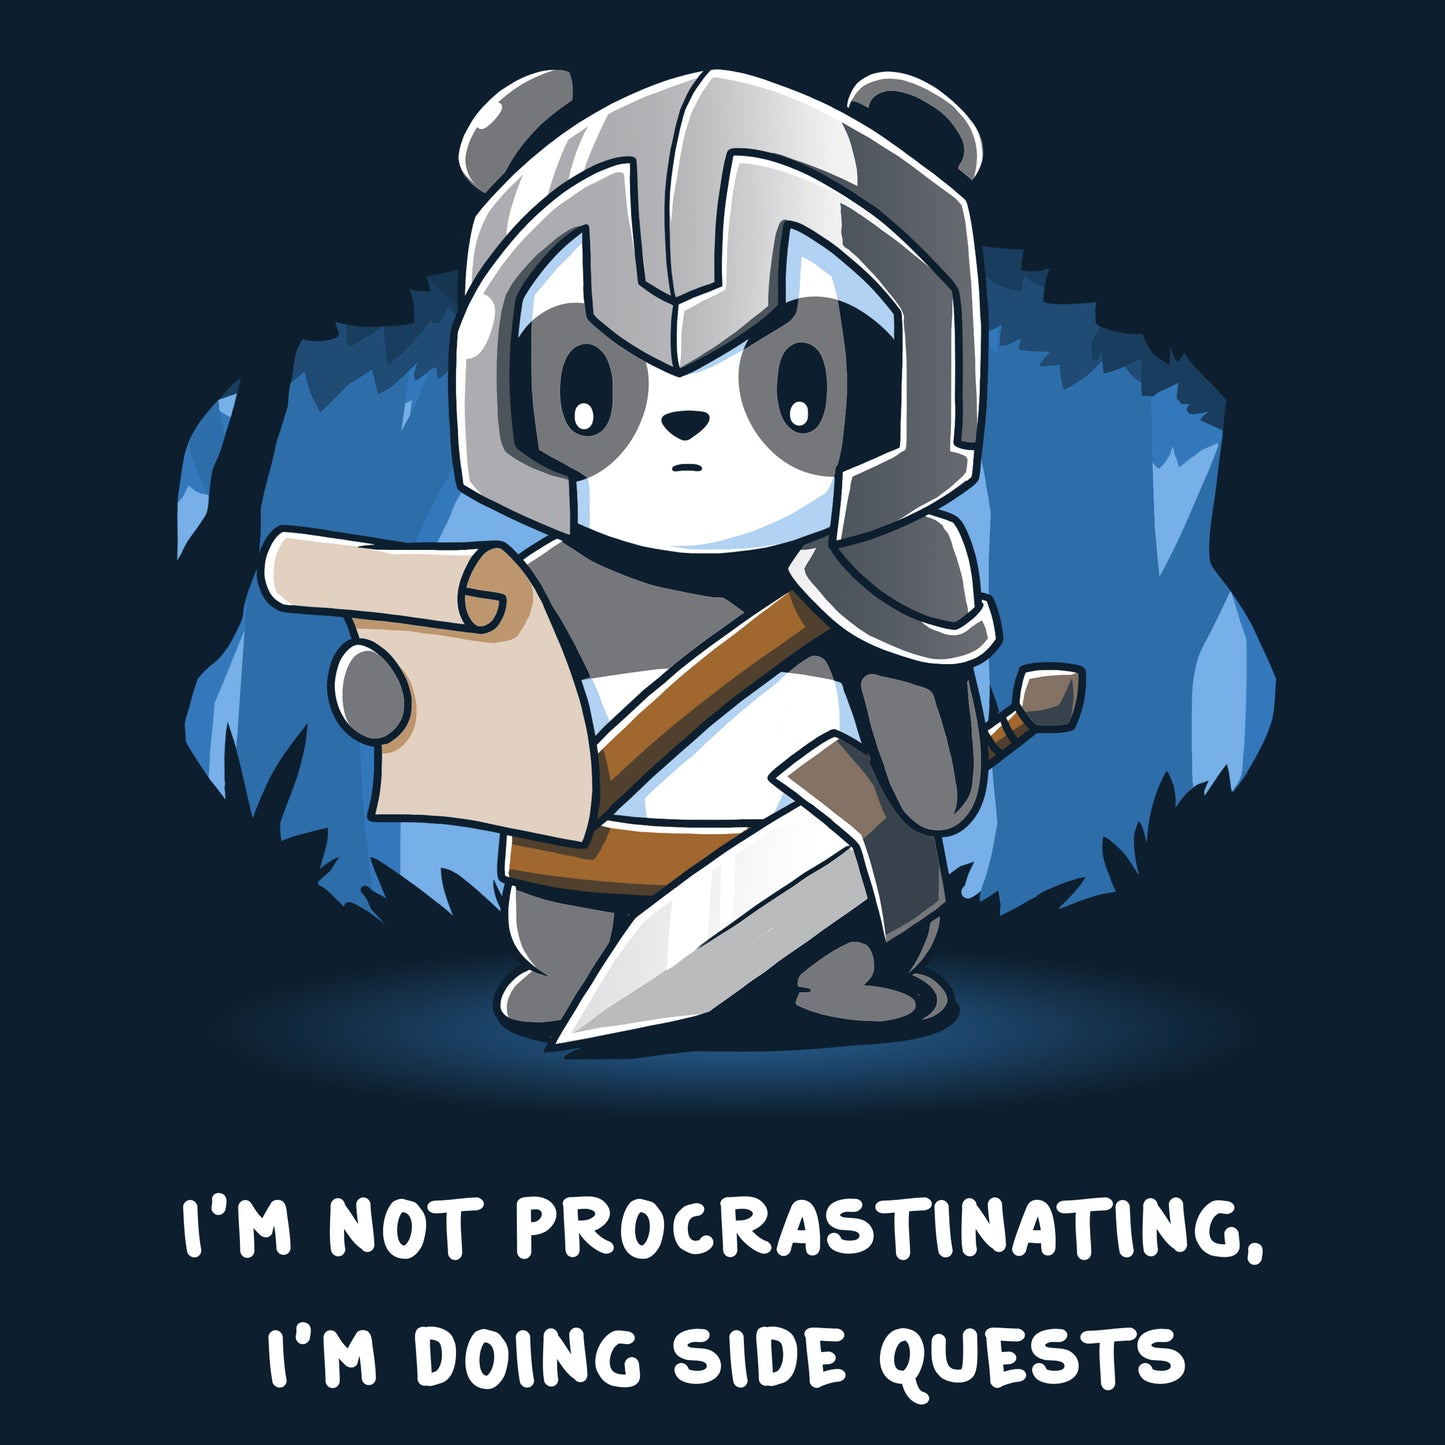 I'm not procrastinating, I'm completing side quests in my TeeTurtle "I'm Doing Side Quests" navy blue t-shirt.